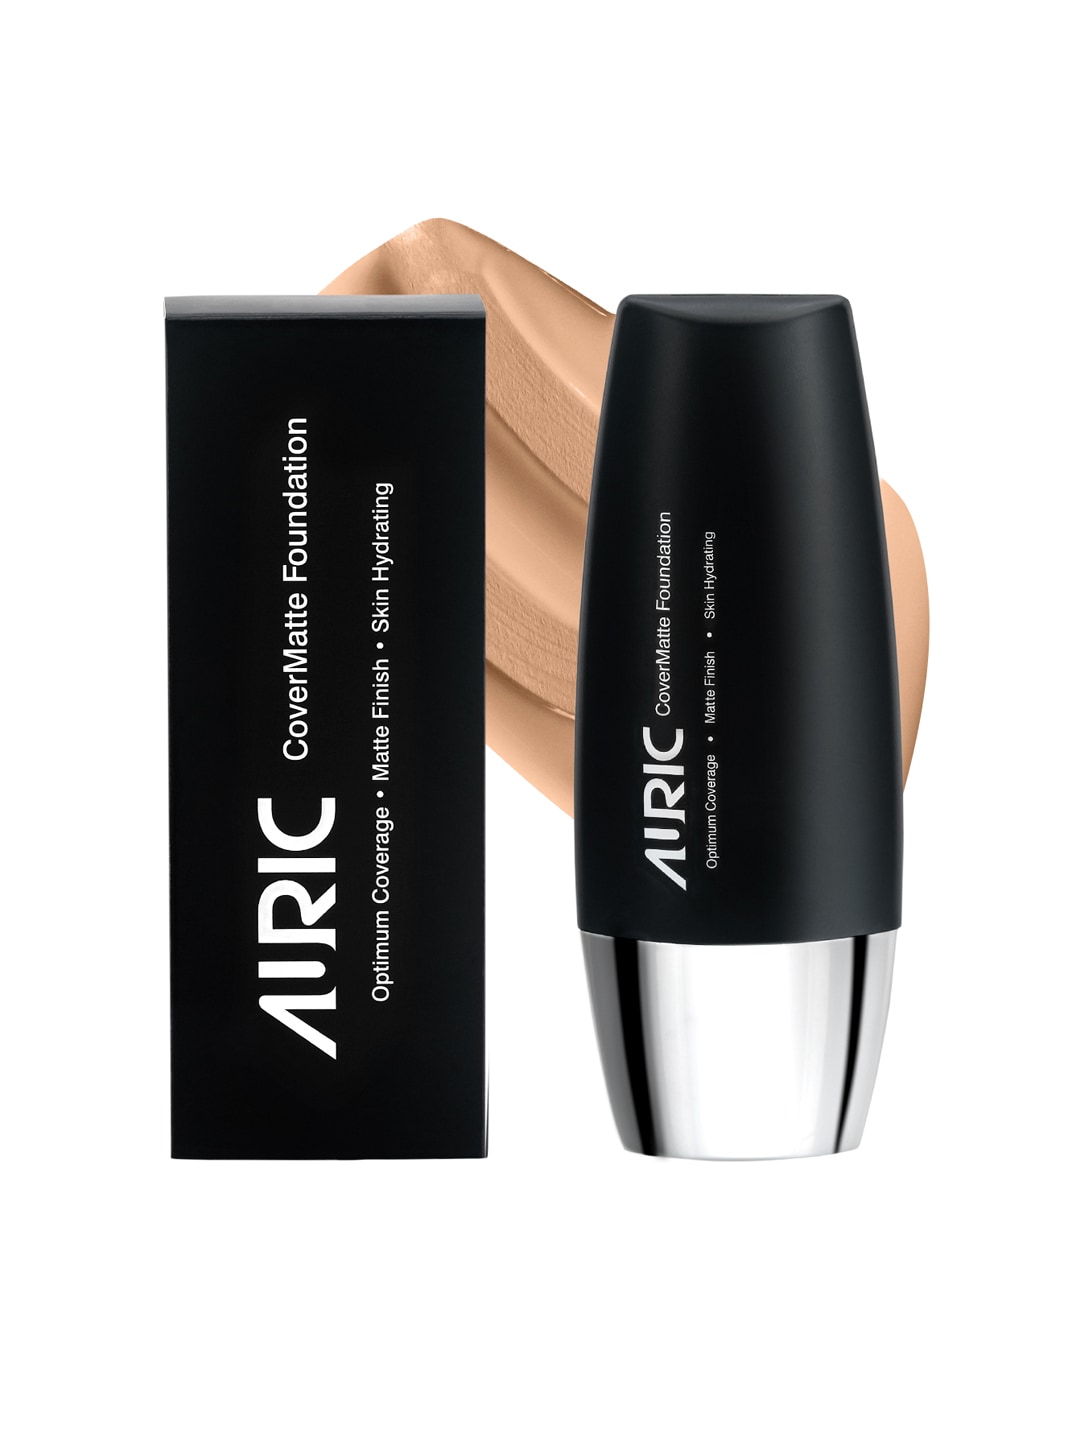 AURIC Women Cover Matte Foundation Light Sienna 30 ml Price in India